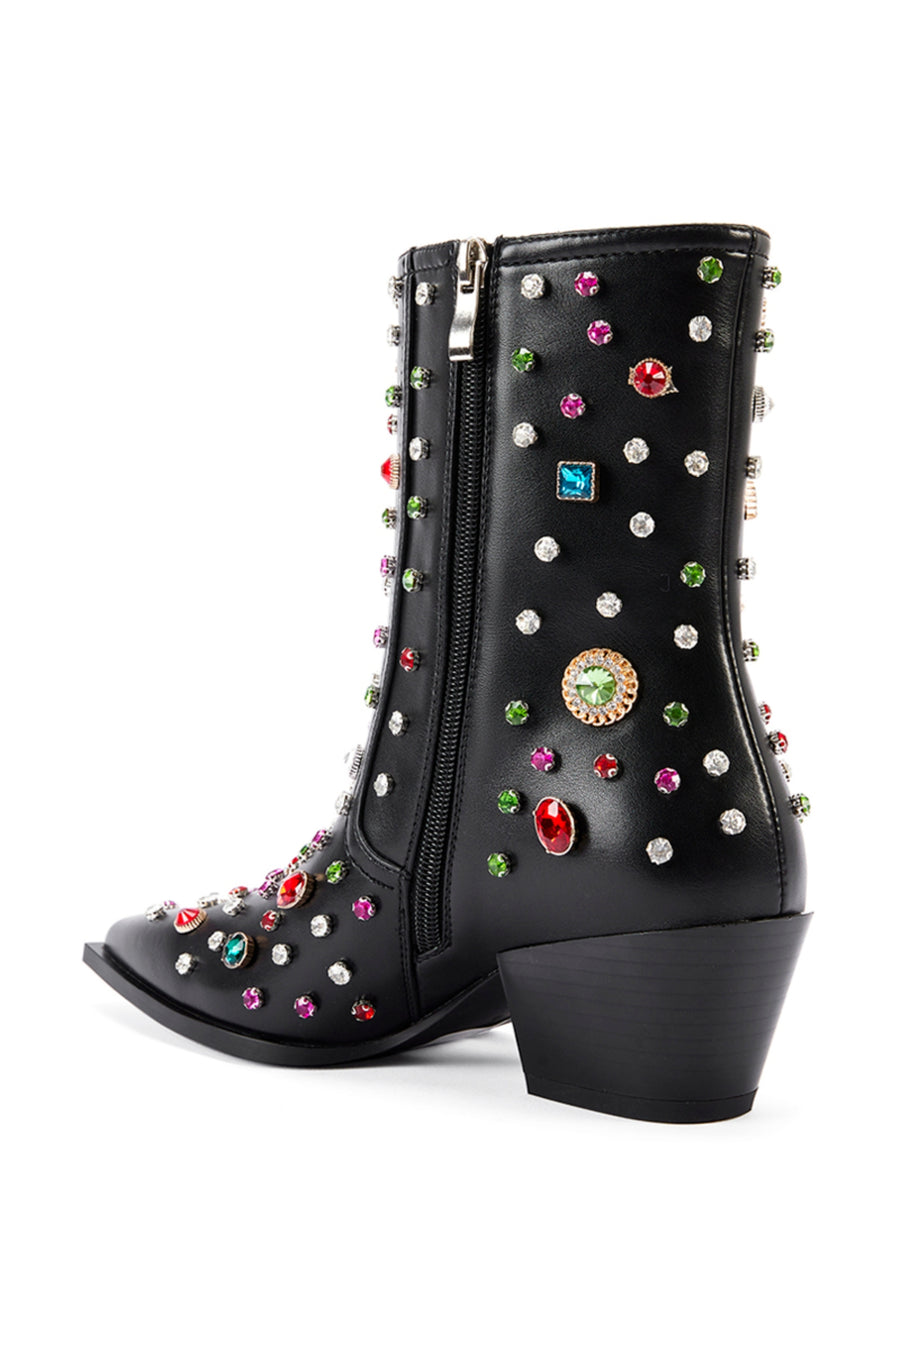 back view of black faux leather western bootie with classic cowboy bootie silhouette and multicolored rhinestone gem embellished accents